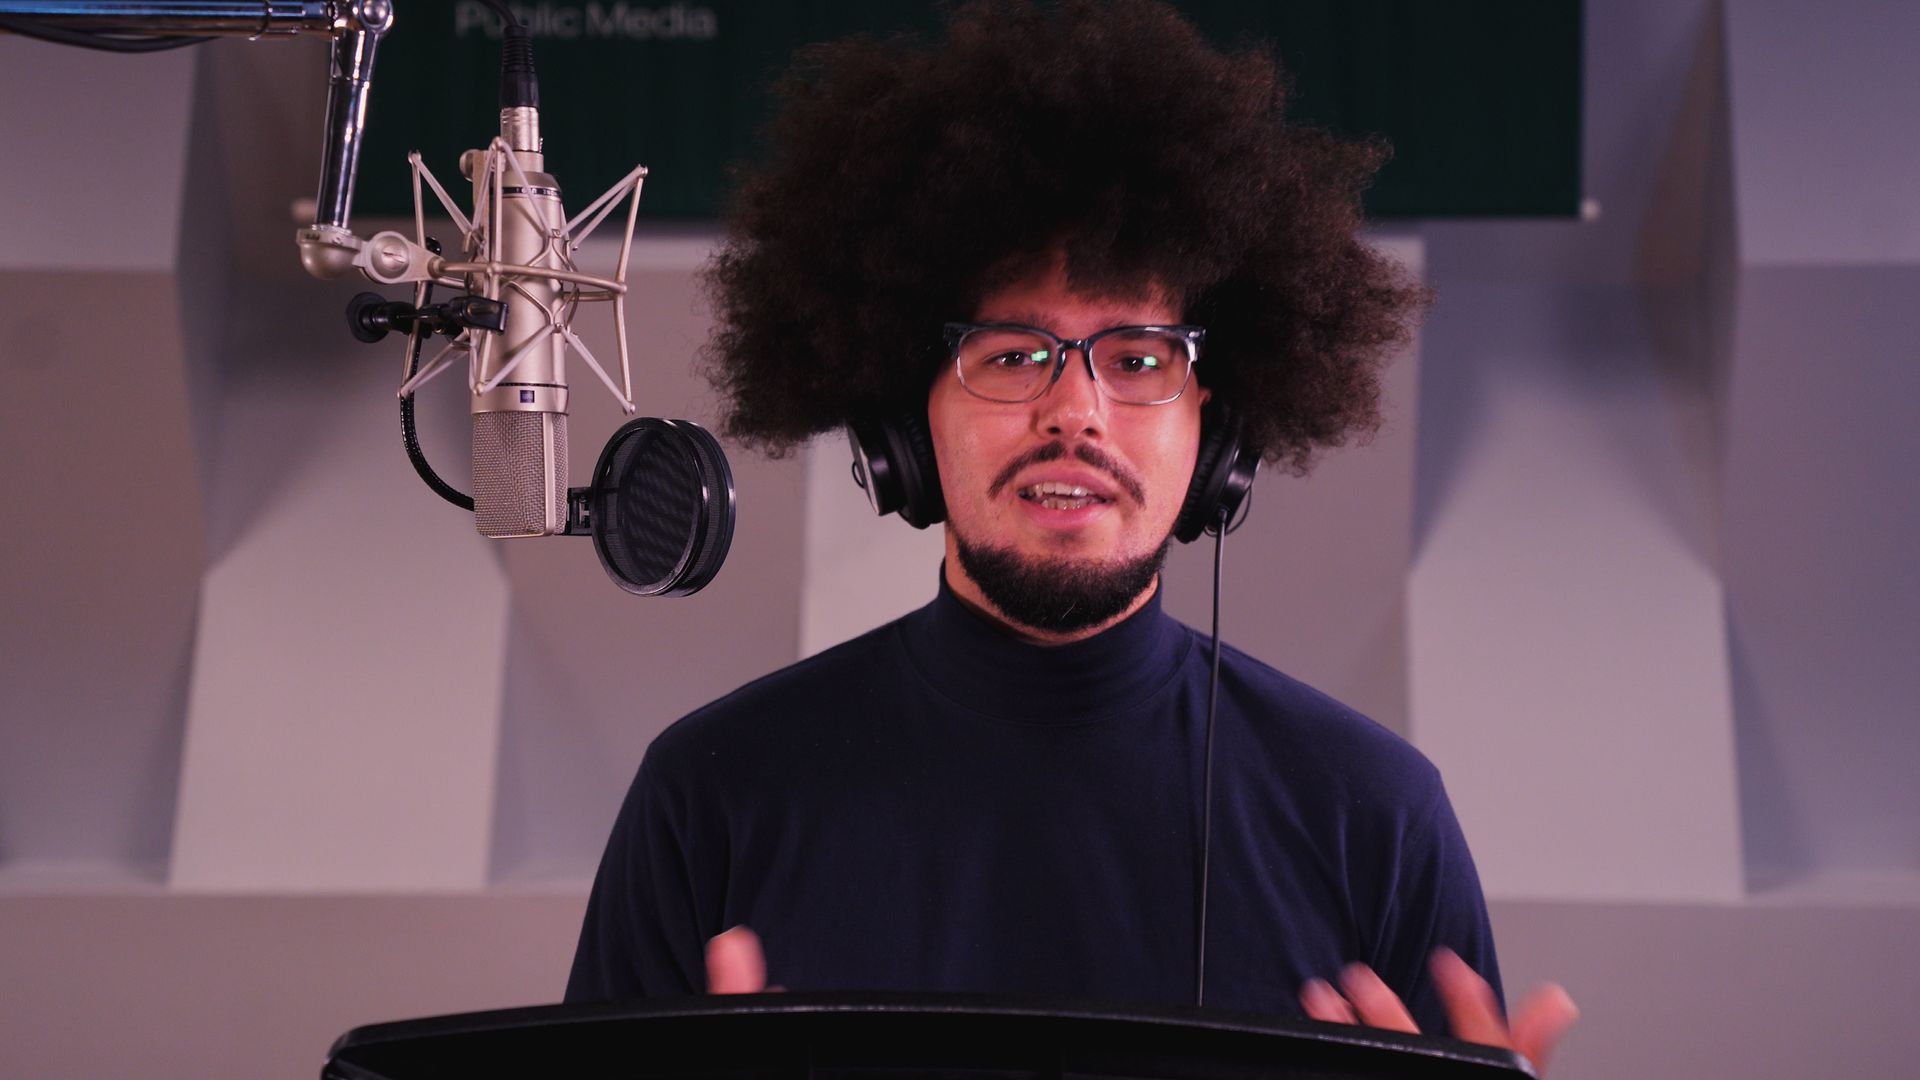 a black man with an afro and glasses is standing in front of a microphone